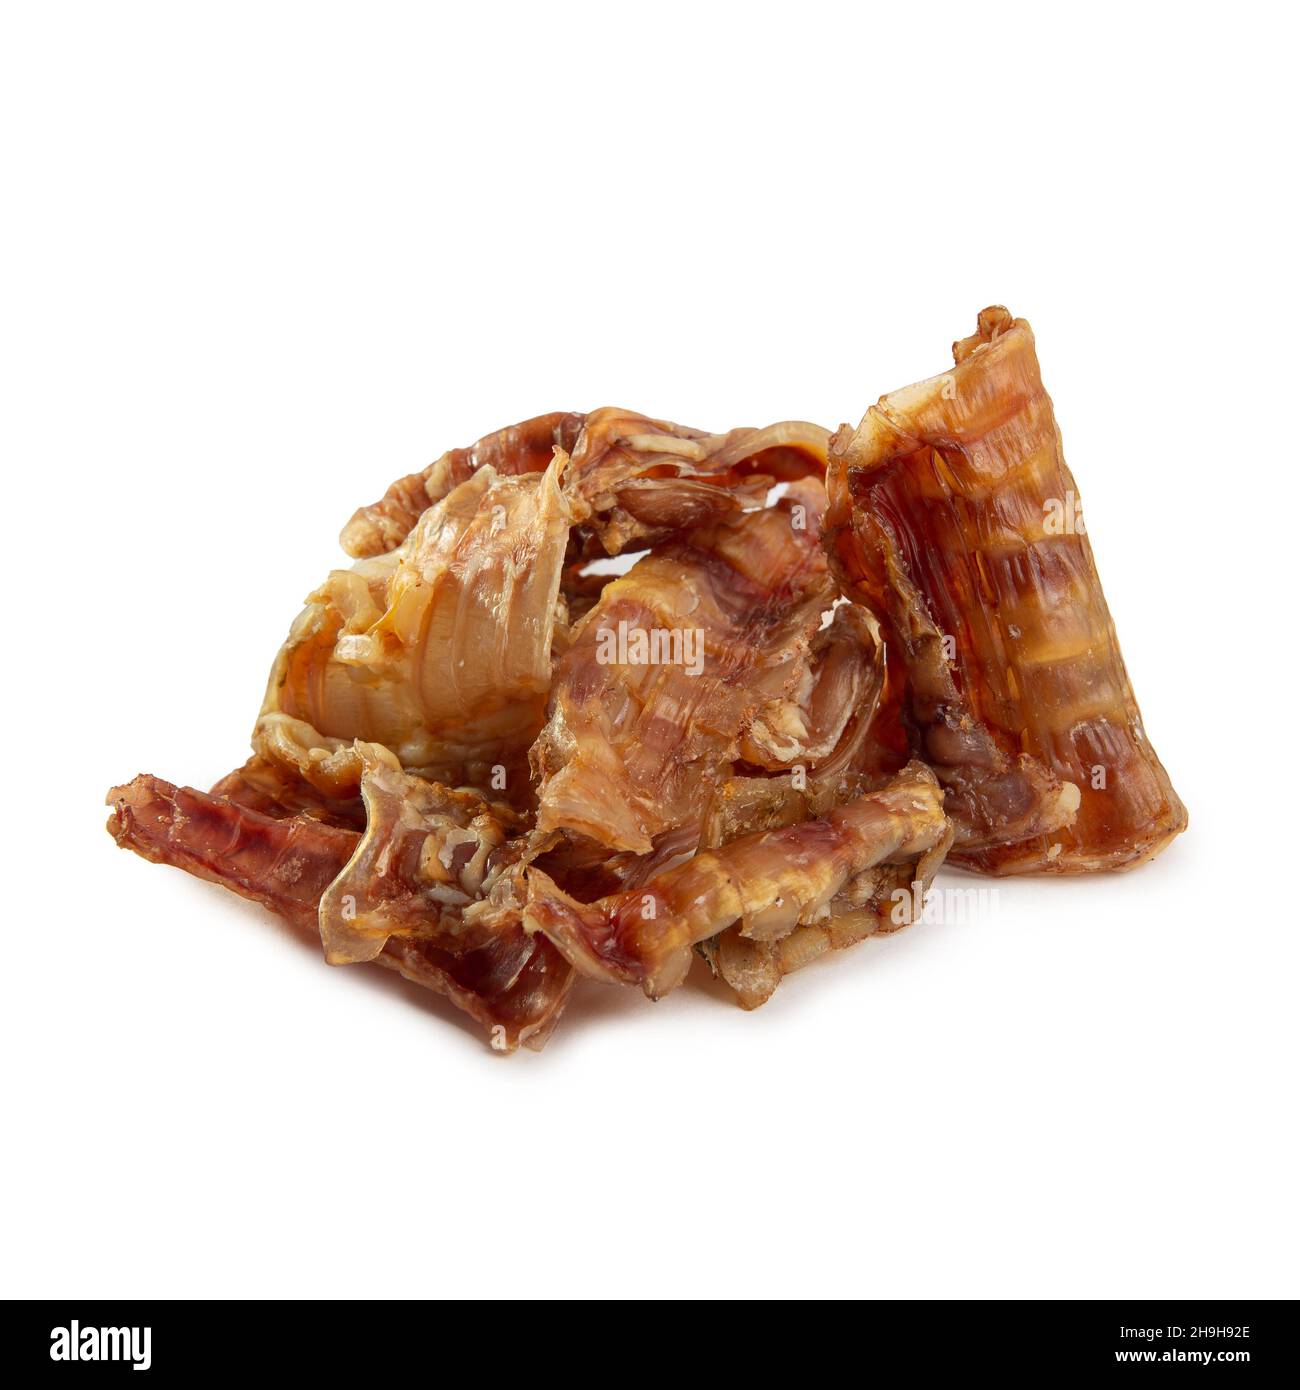 Food for dogs - dried beef offal (trachea) isolated on white background. Natural chewing treats. Stock Photo